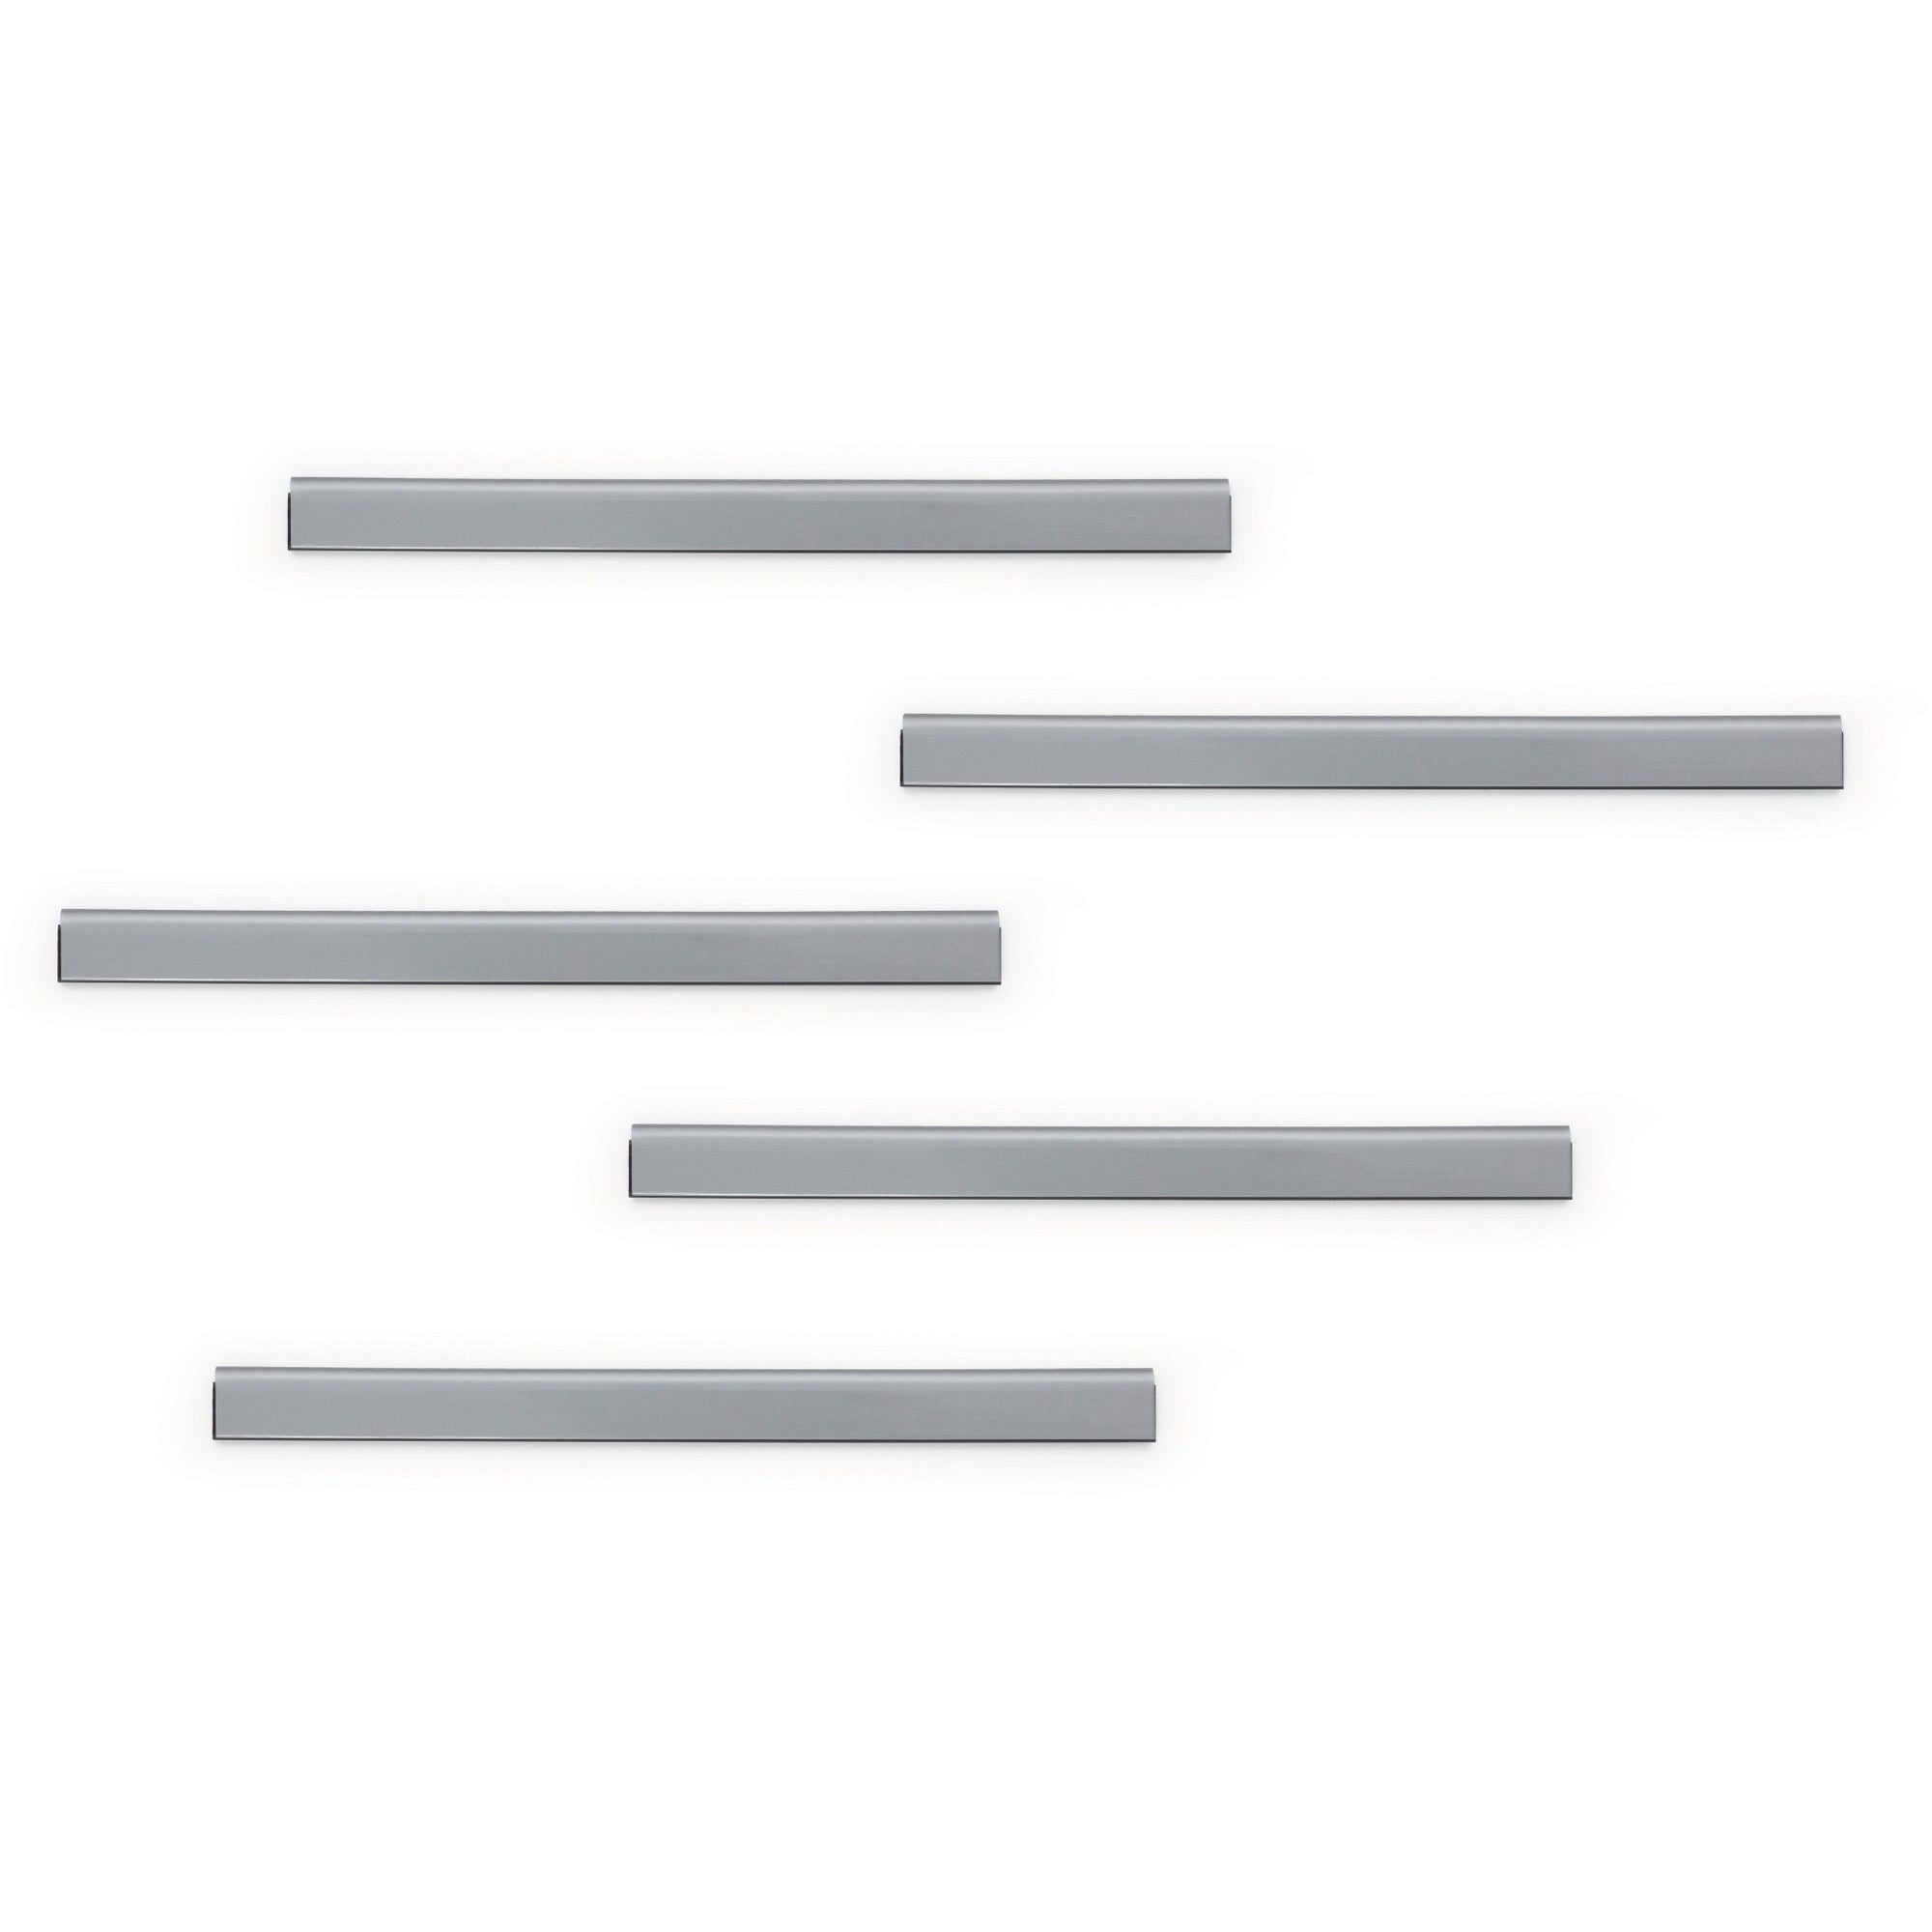 durable-magnetic-strip-hanging-rail-5-pack-silver_dbl470623 - 1